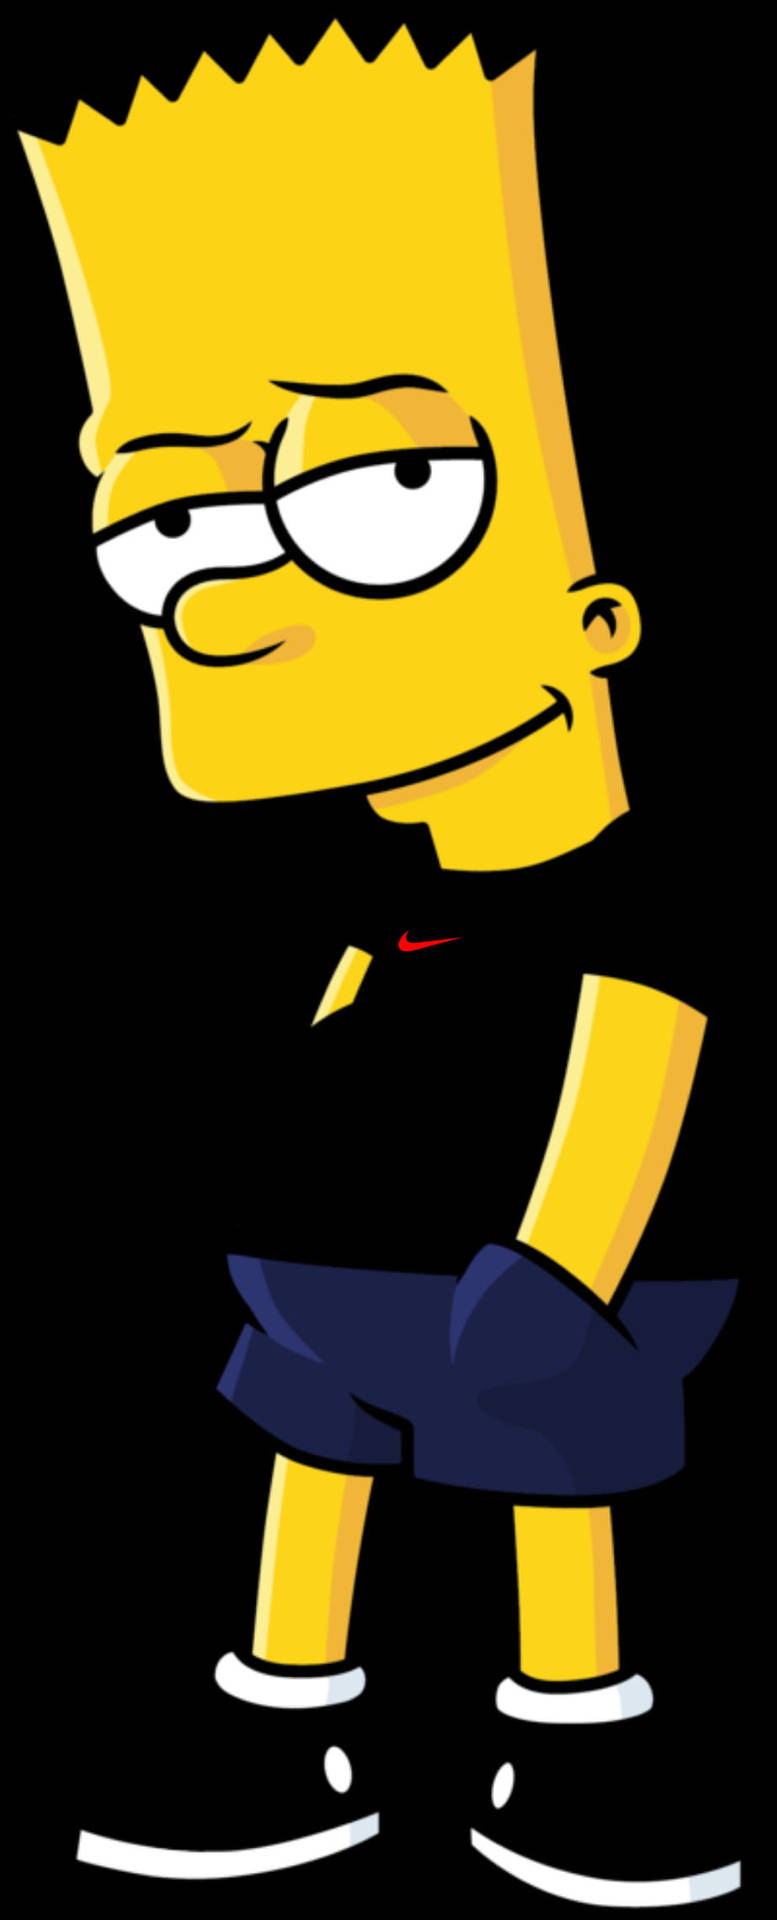 Top 999+ Cool Bart Simpson Wallpapers Full HD, 4K✅Free to Use